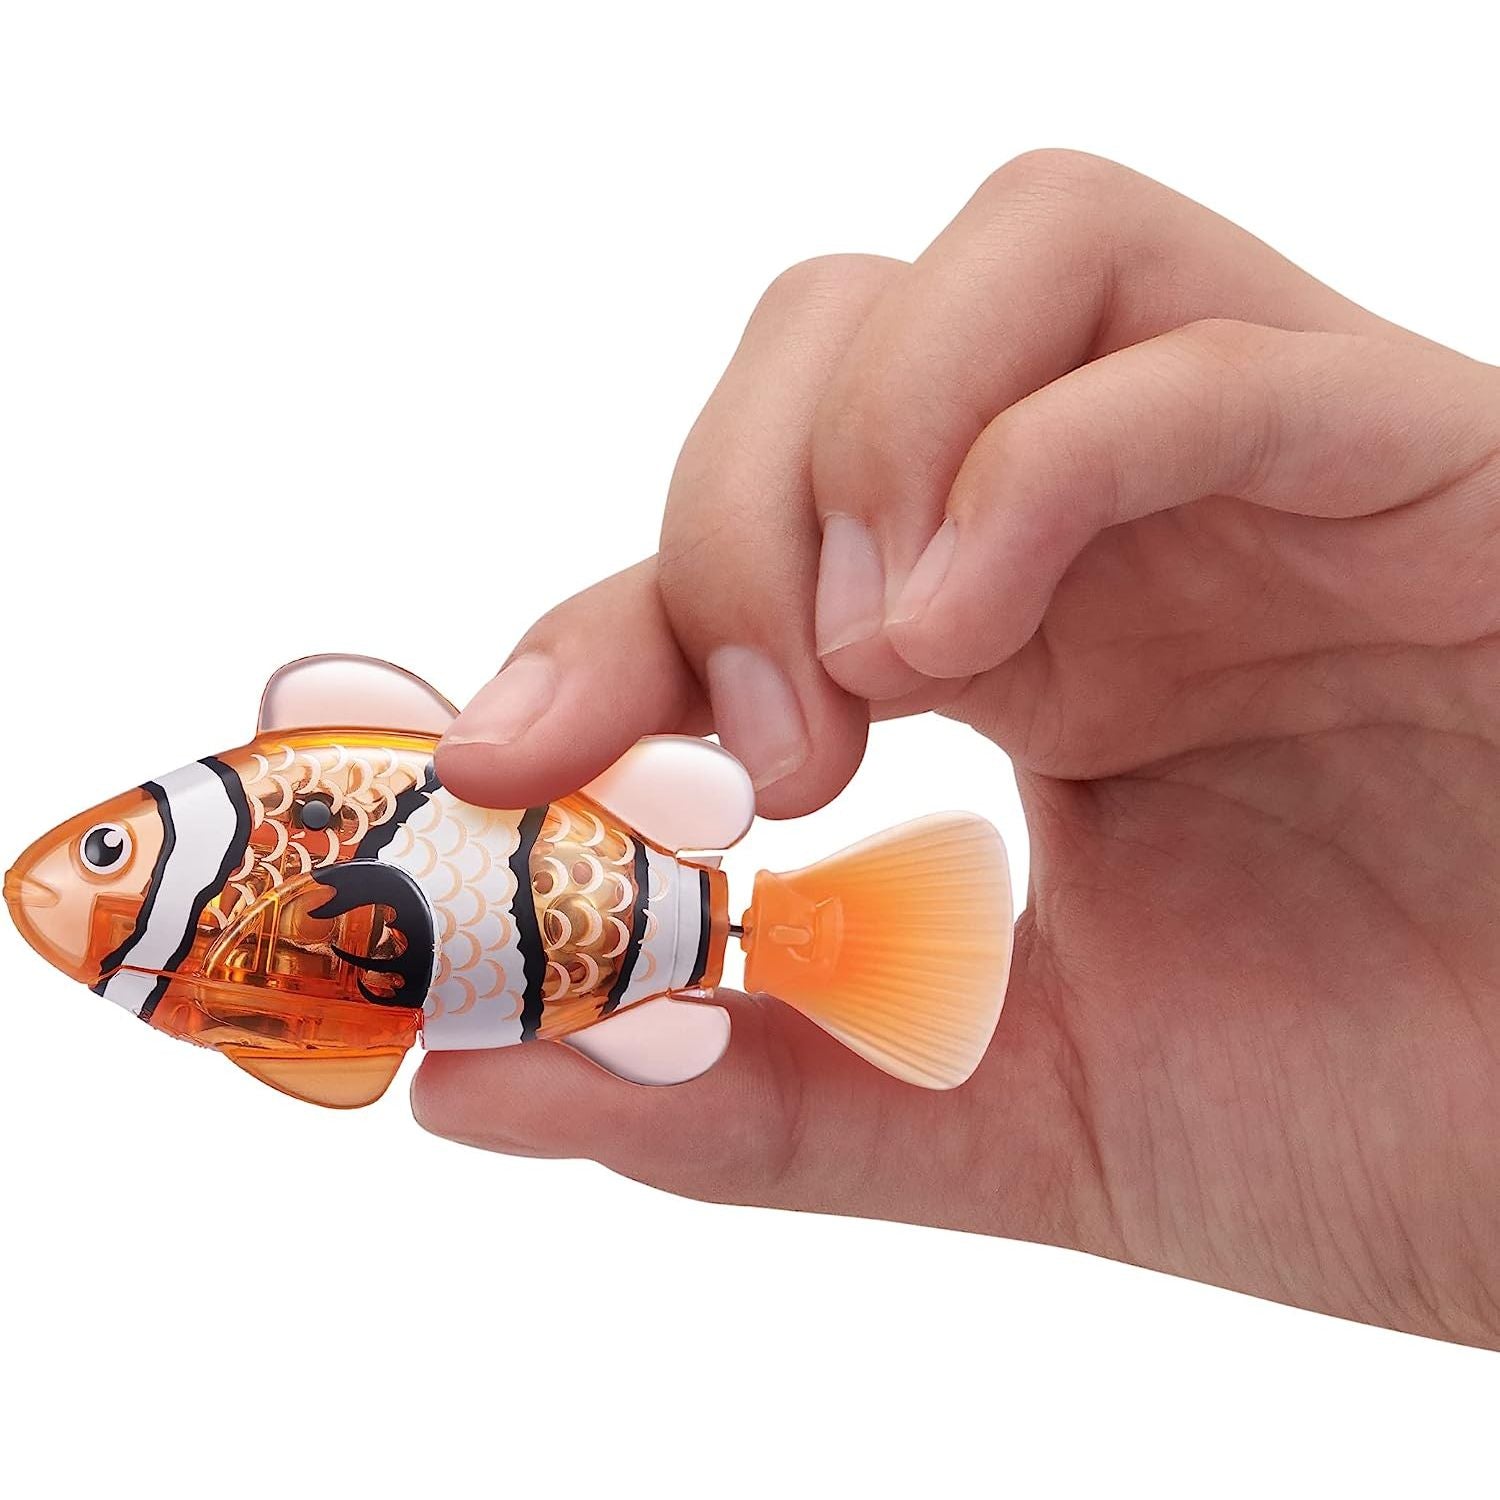 Robo Alive Robo Fish Robotic Swimming Fish Orange by ZURU Water Activated, Changes Color, Comes with Batteries - Series 3